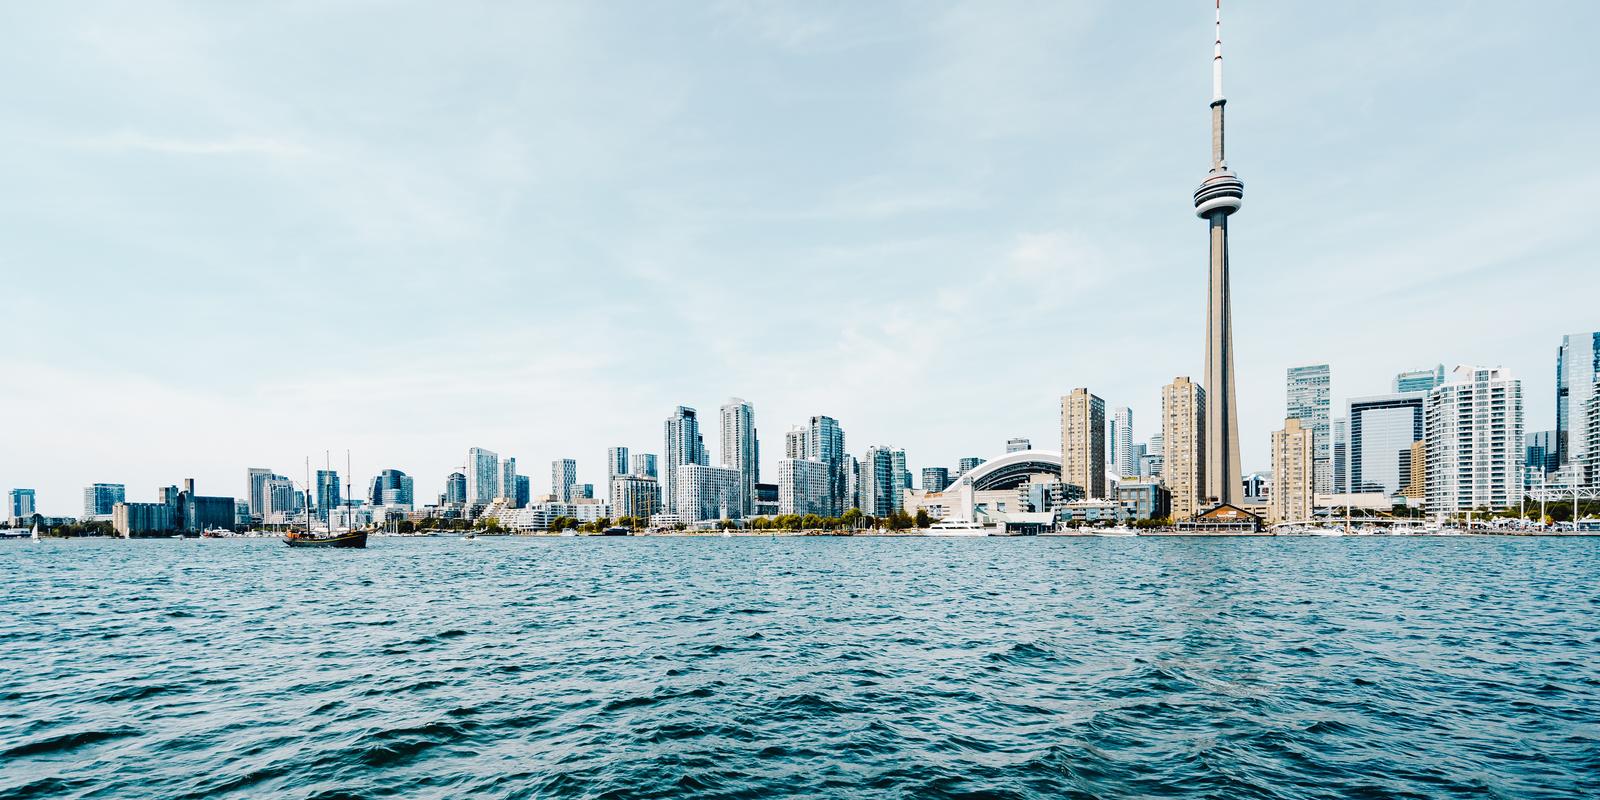 View from the water of the Toronto Skyline including the CN TTower